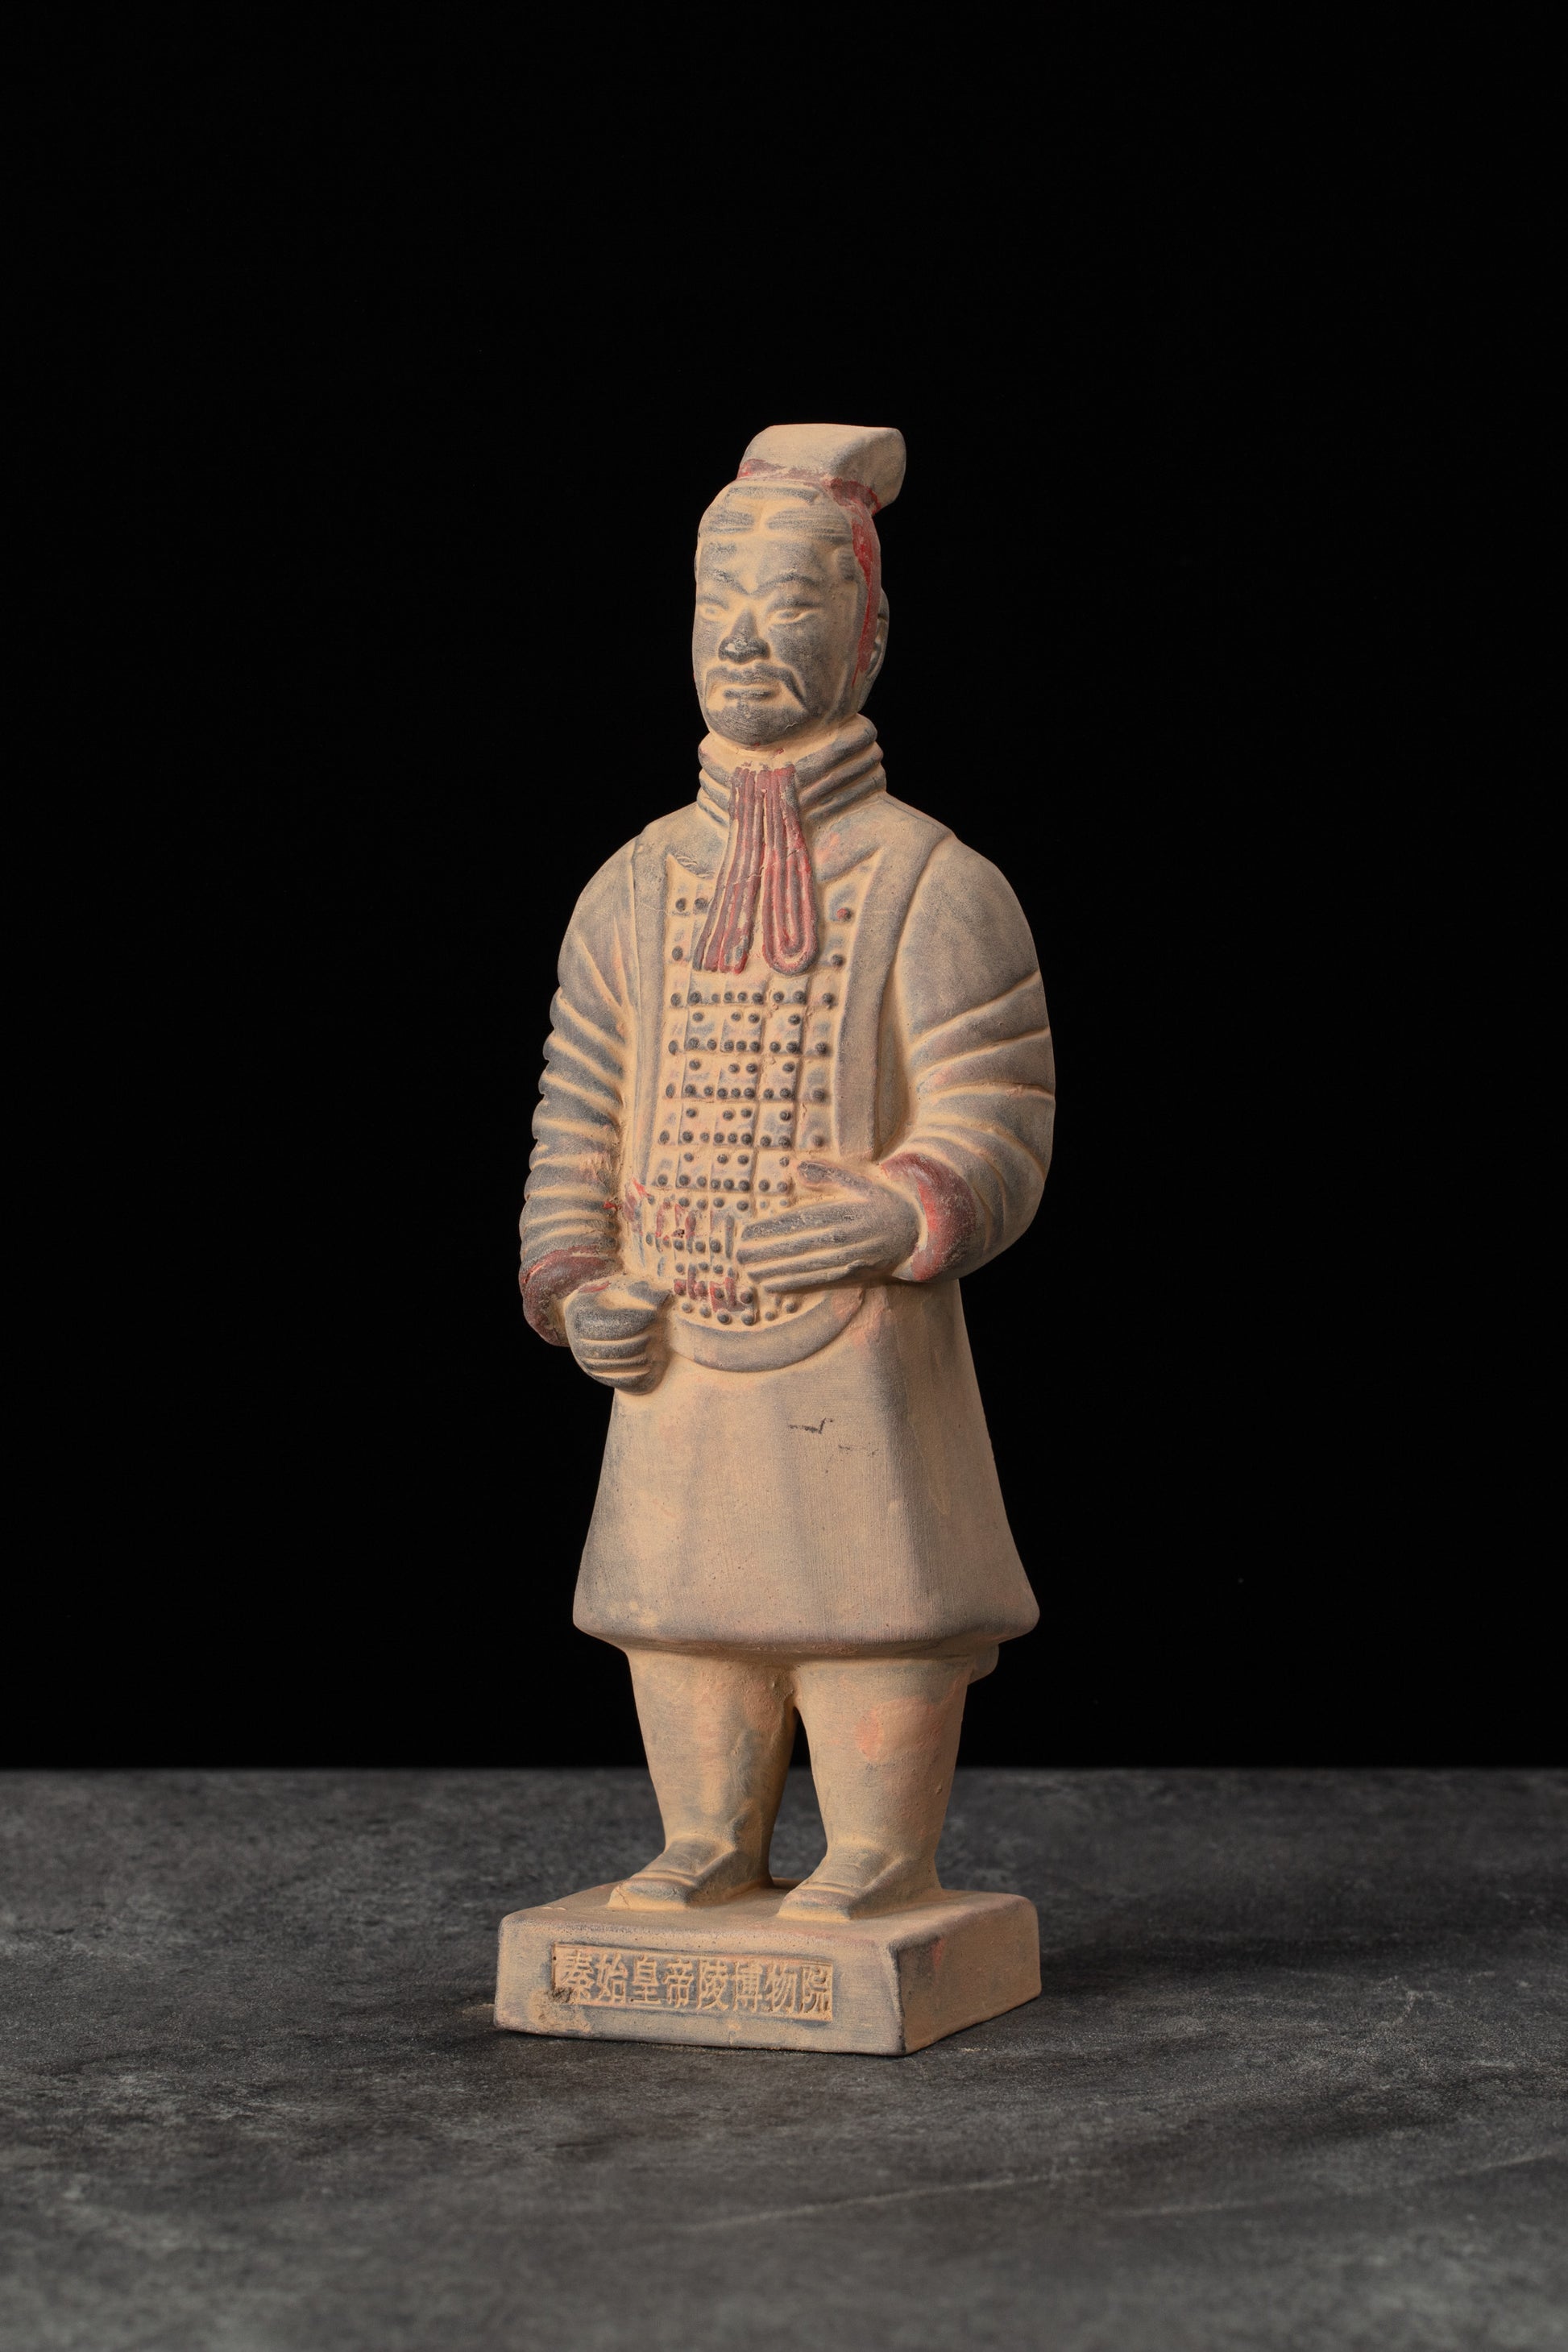 20CM Painted Officier - CLAYARMY-Front view of the 20CM Painted Clayarmy Officer figurine, highlighting the detailed painting on the jacket and crown.